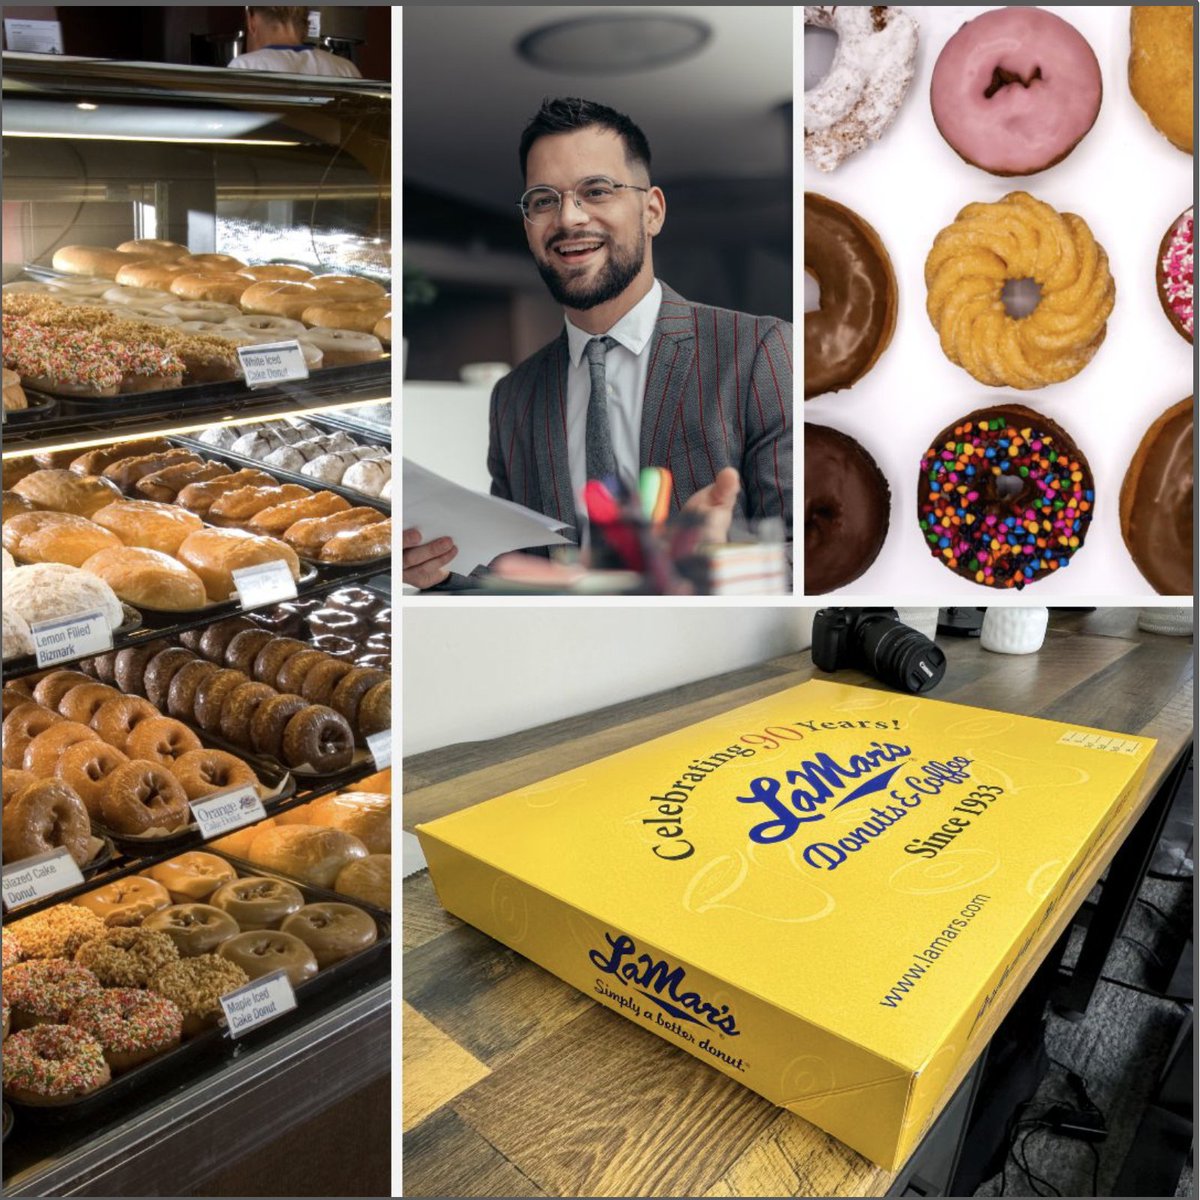 Boost morale on Administrative Professionals Day (Wednesday, April 24) by treating your team to a box of a dozen Ray's Original Glazed Donuts. It's a sweet way to lift spirits in the middle of the week! 🍩#AdminProfessionalsDay #TeamAppreciation #LaMarsDonuts #SimplyABetterDonut